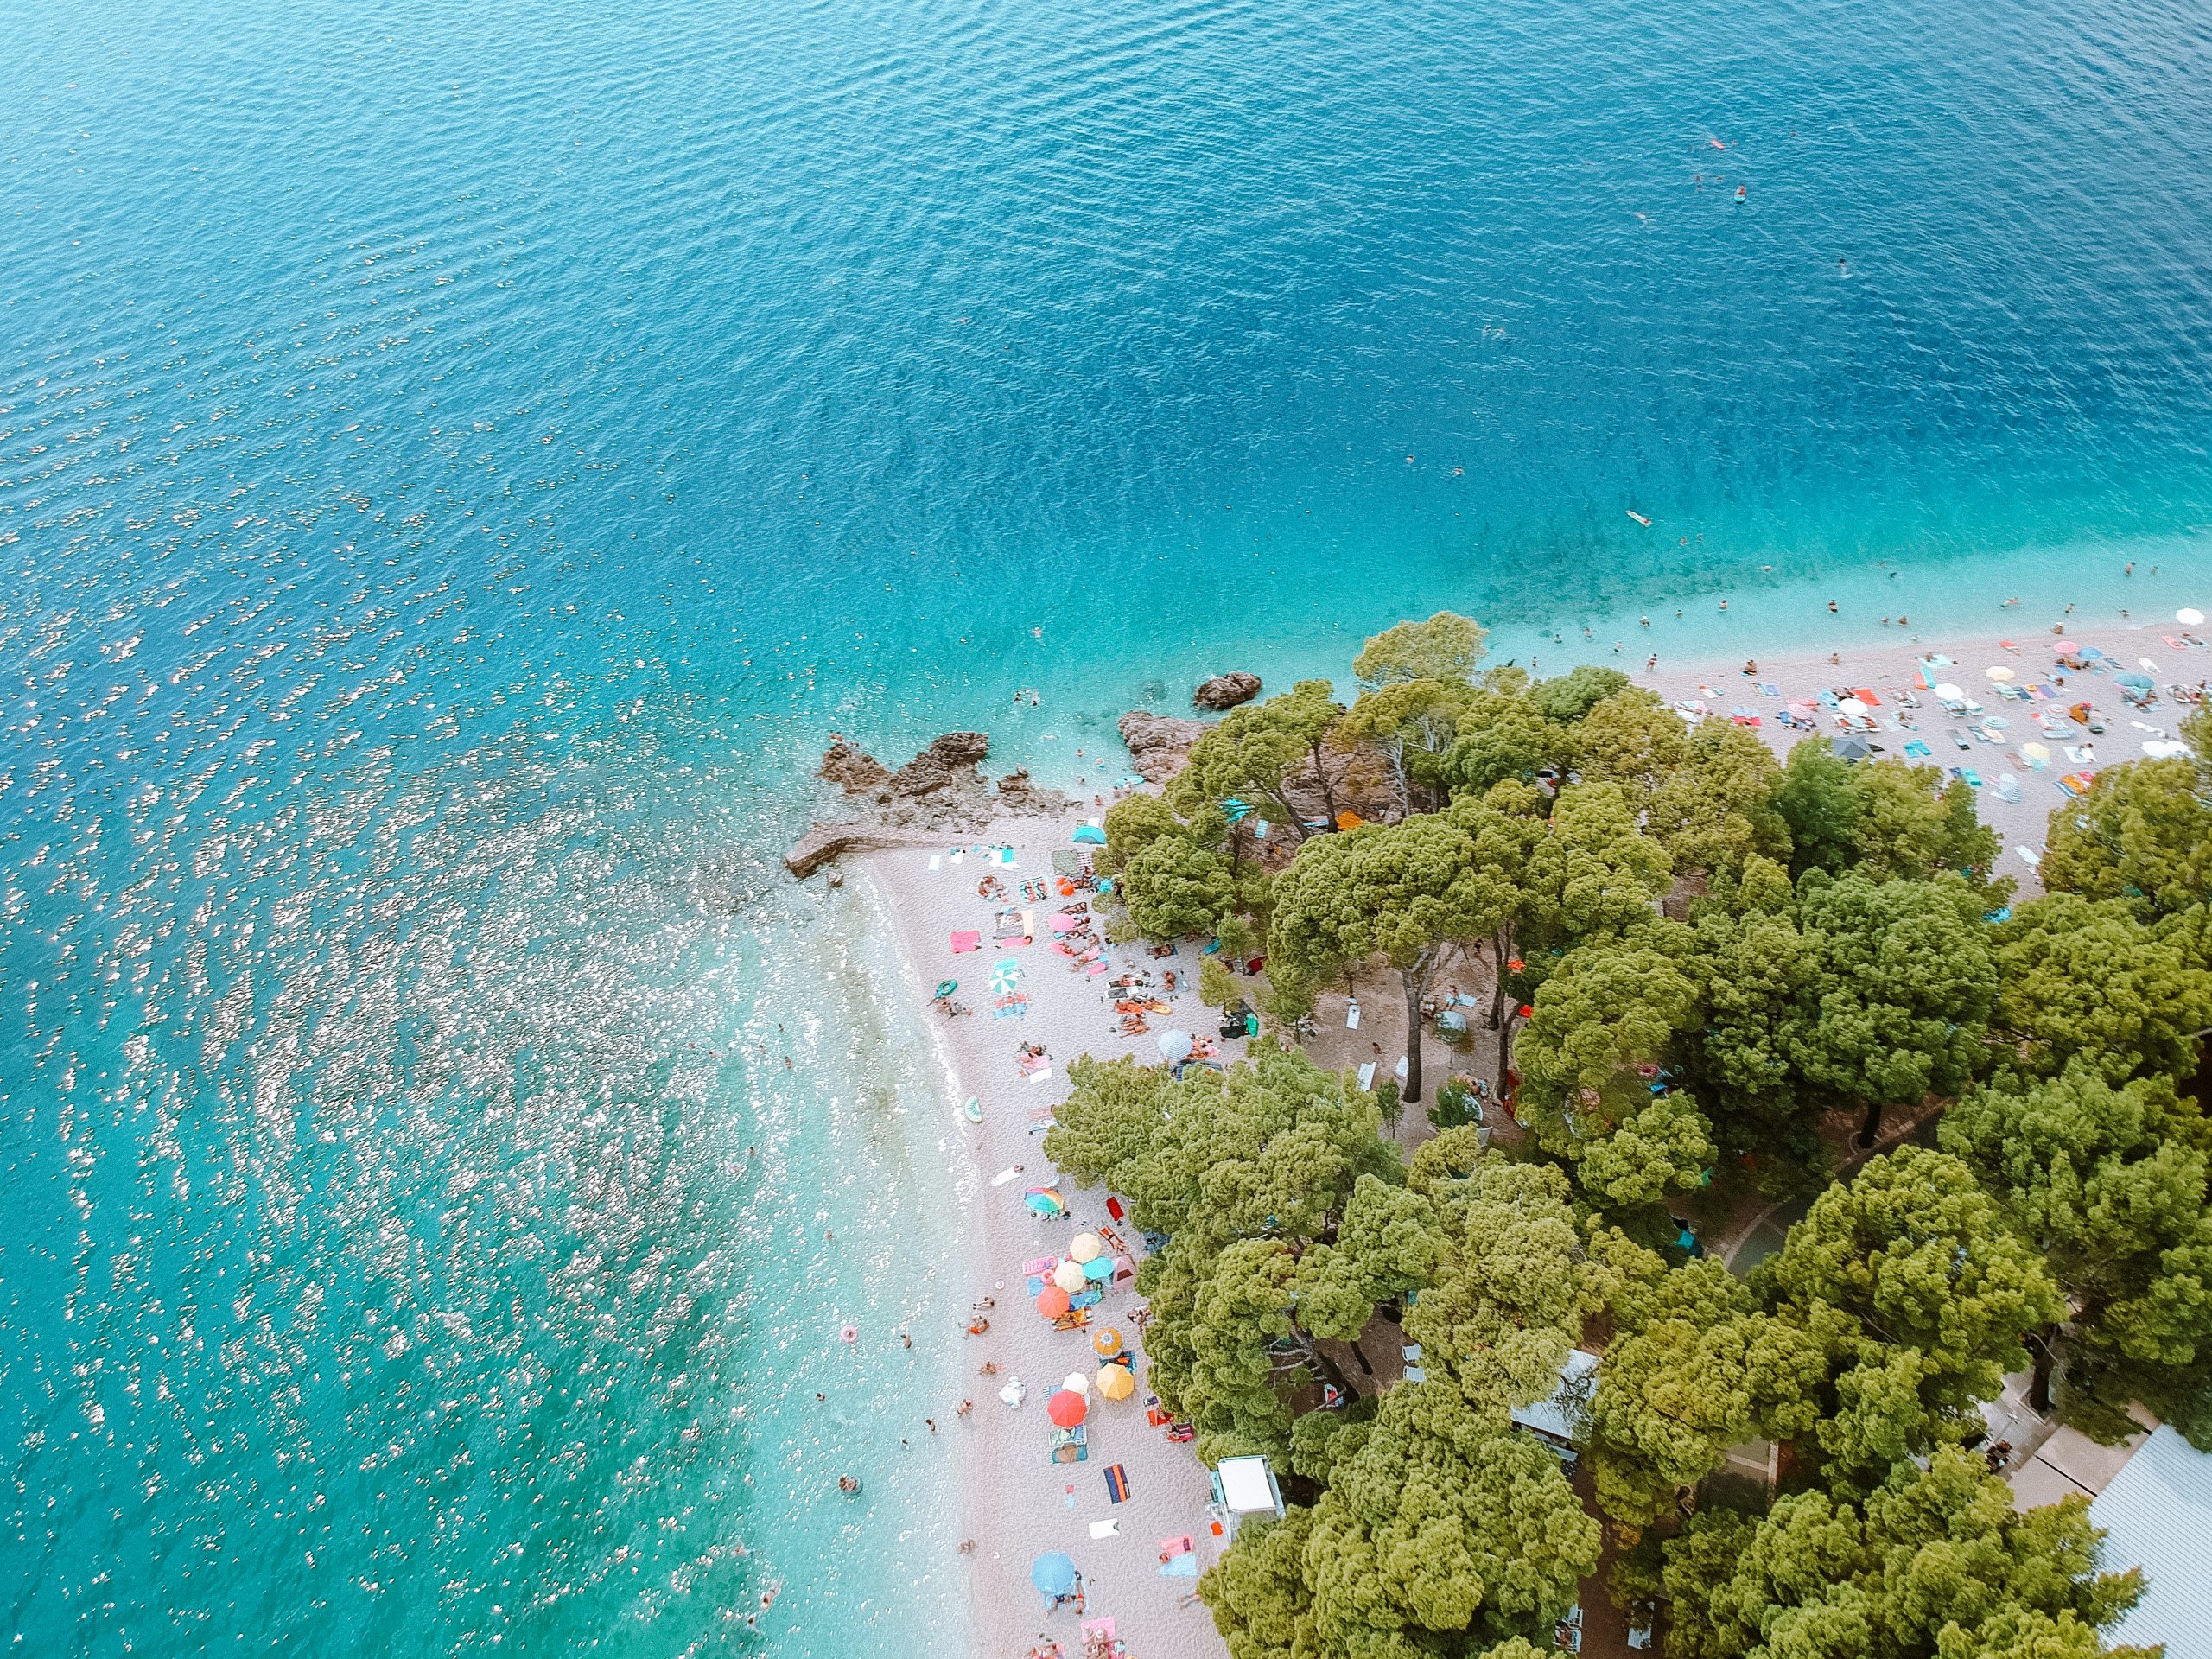 An aerial view of the coast in the Croatian Riviera. Turquoise waters and pine trees.